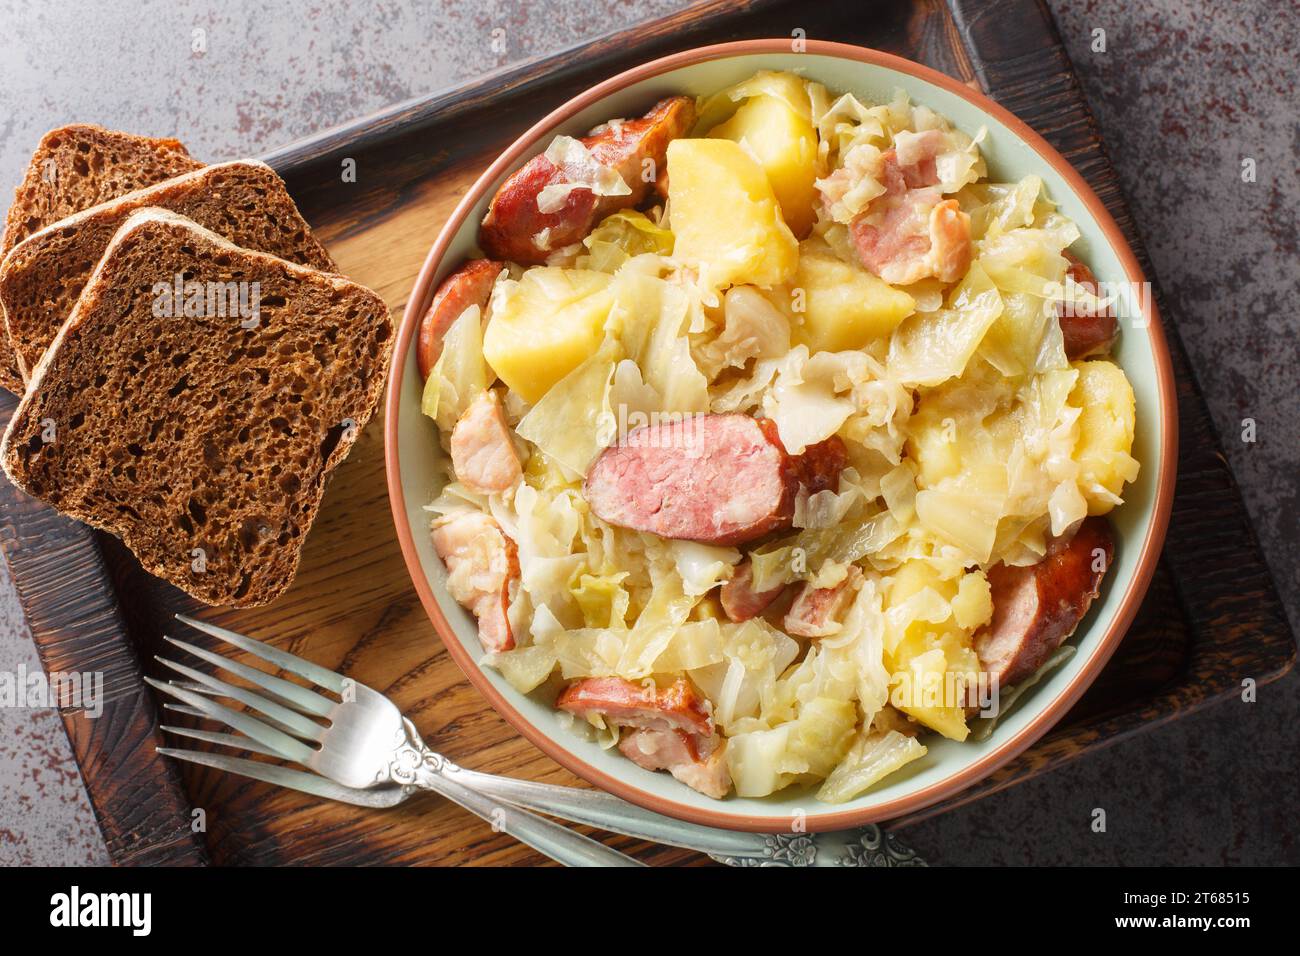 Hunter's cabbage stewed with sausage, potatoes, bacon and onions close-up in a bowl on the table. Horizontal top view from above Stock Photo